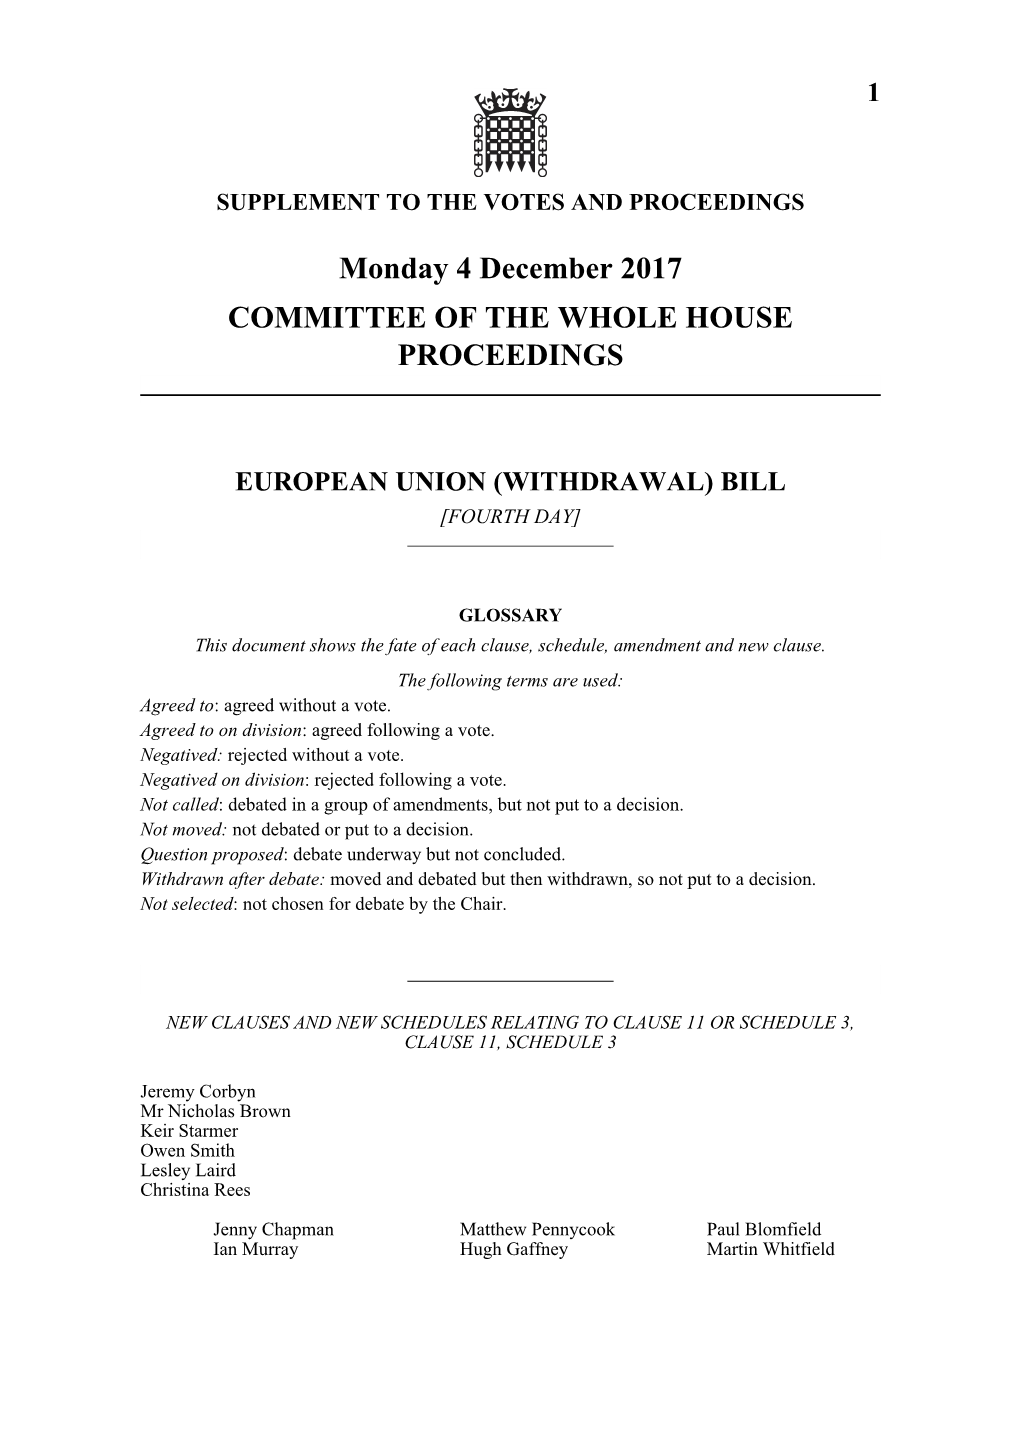 Monday 4 December 2017 COMMITTEE of the WHOLE HOUSE PROCEEDINGS